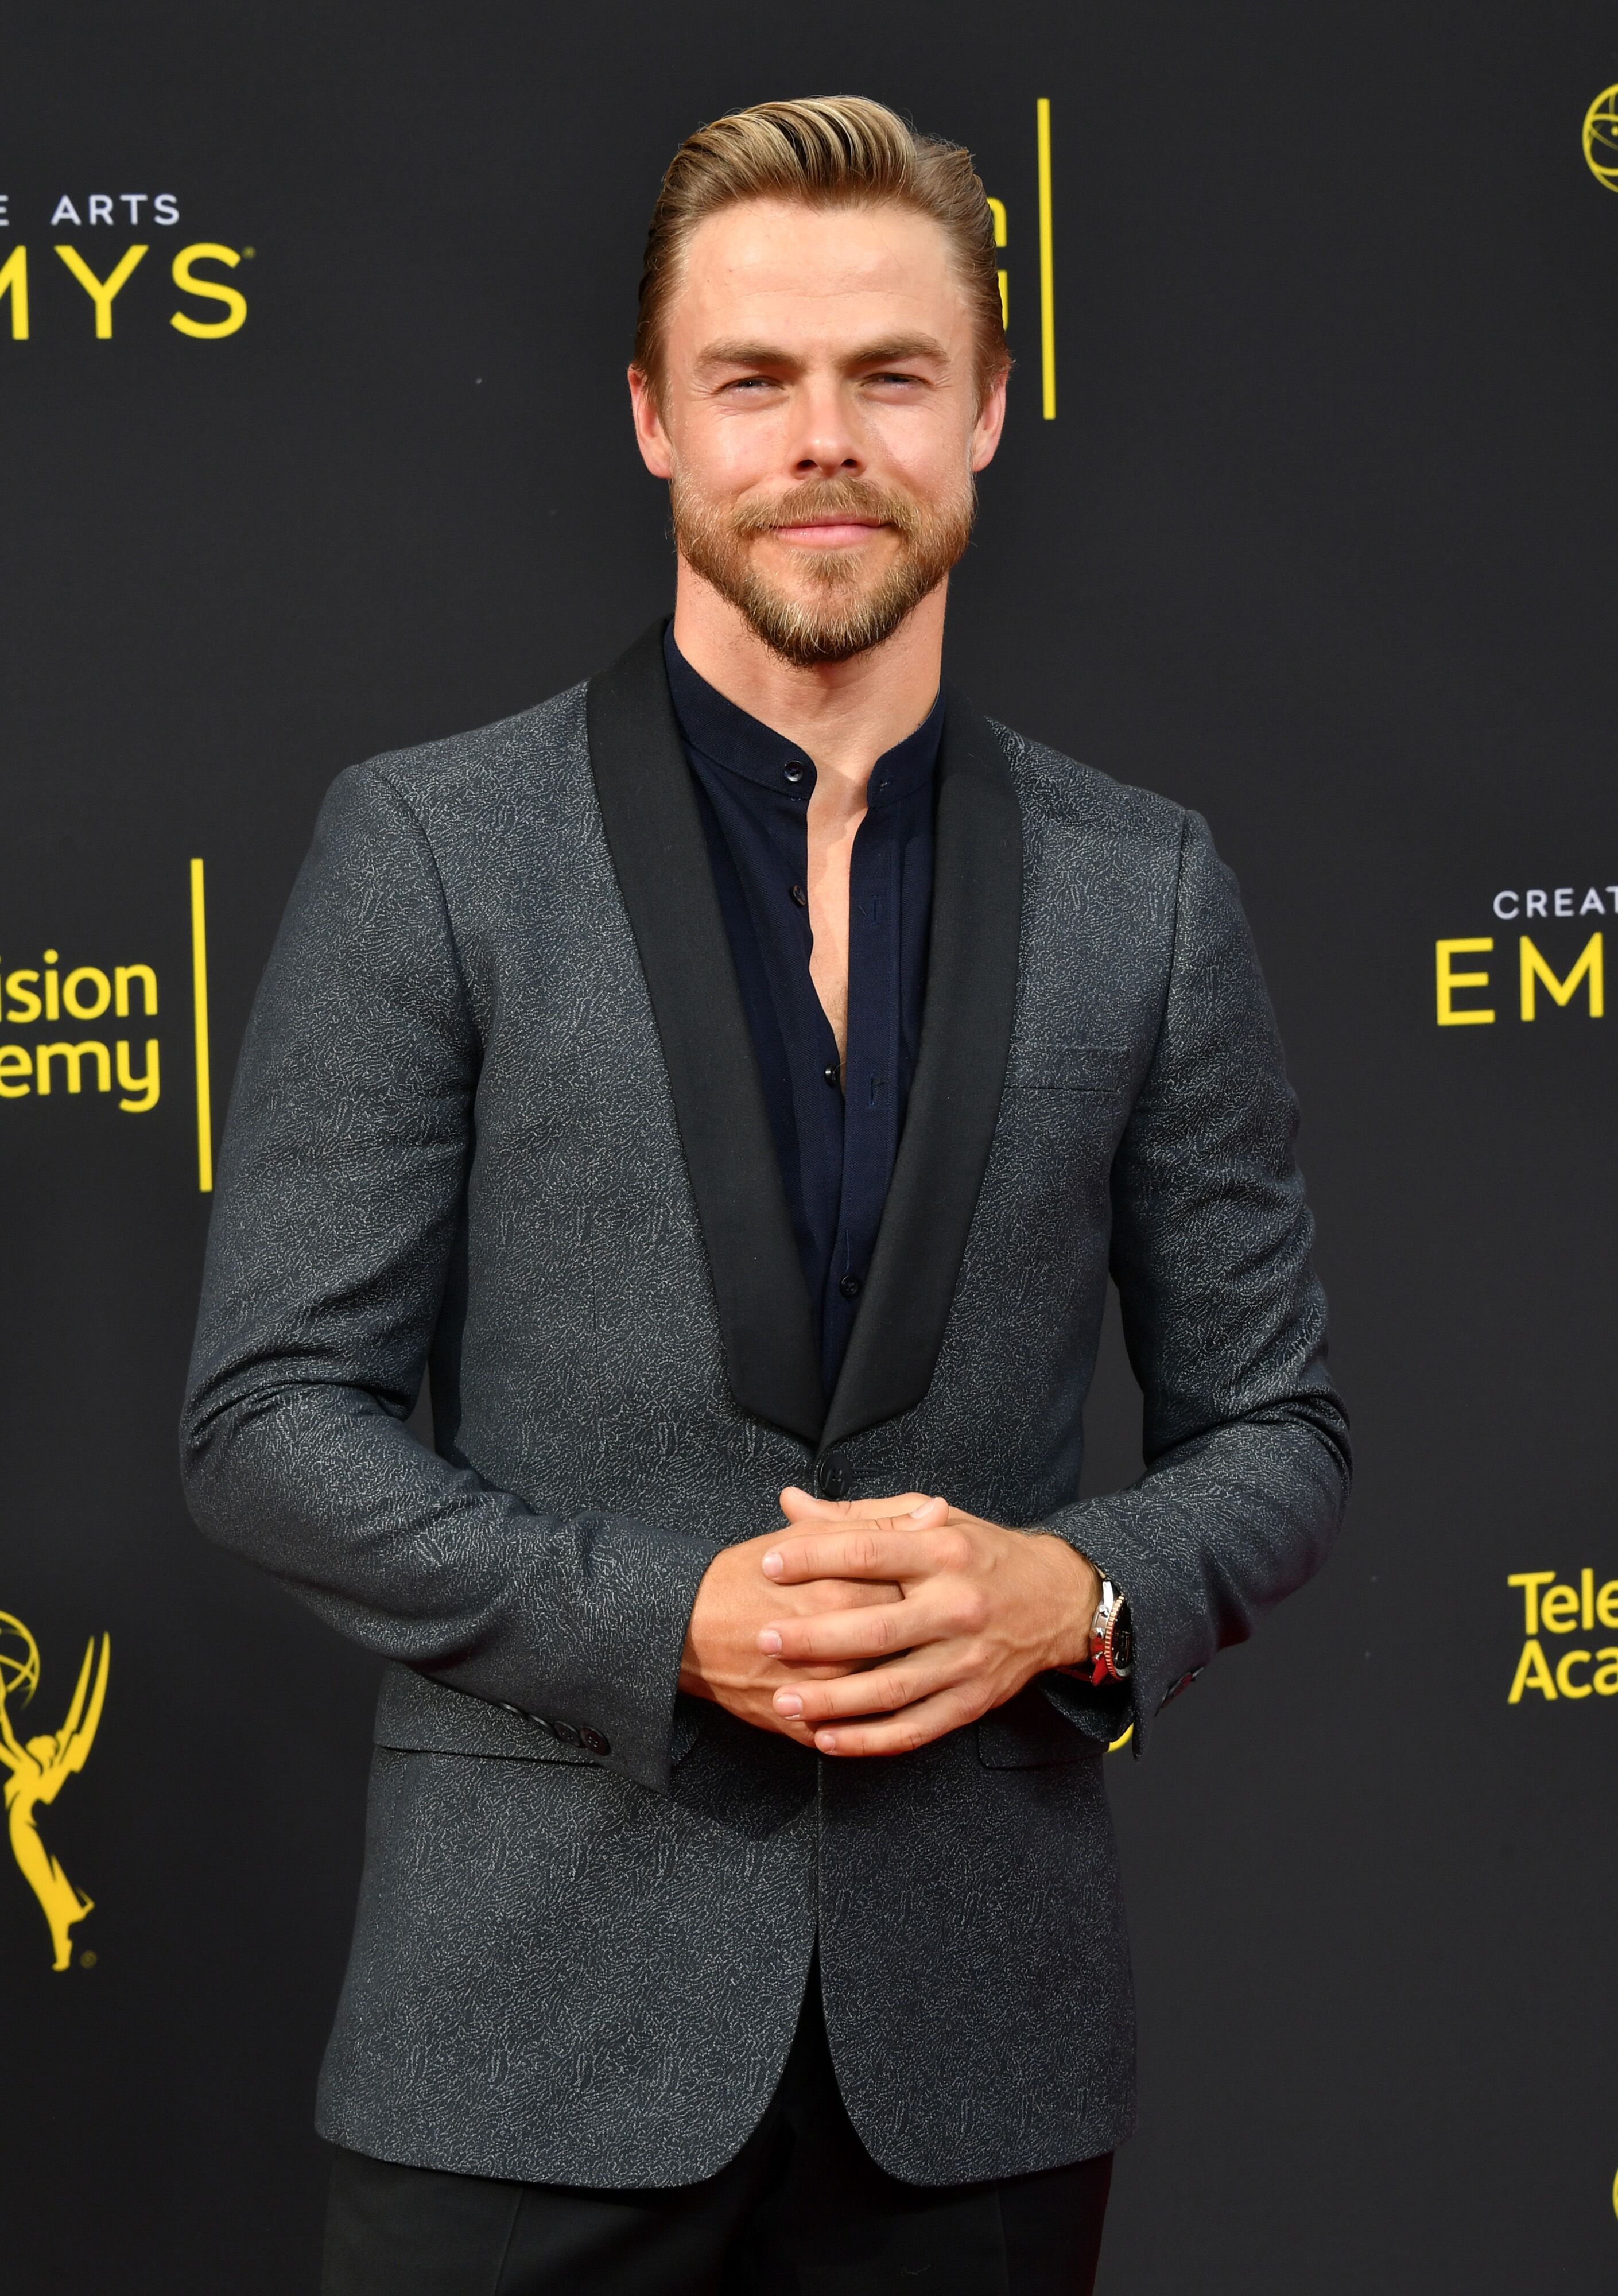 Derek Hough at the Creative Arts Emmy Awards on September 14, 2019, in Los Angeles, California | Photo: Amy Sussman/Getty Images